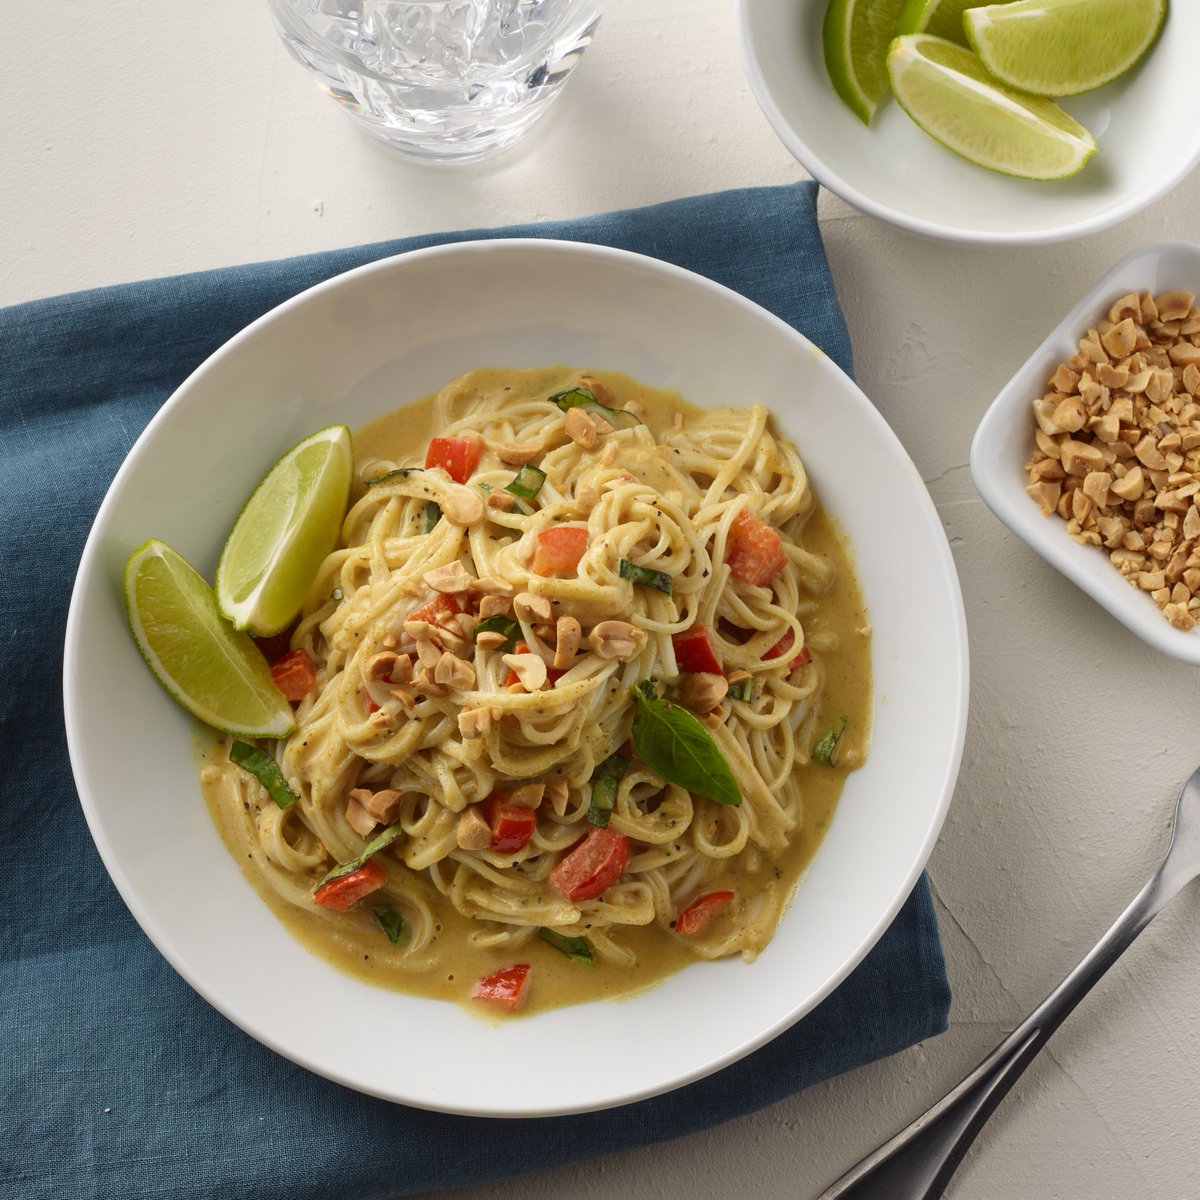 From quick weeknight dinners to entertaining guests, our Peanut Curry Pasta adds an instant touch of culinary sophistication to any dish. The pastabilities are endless!